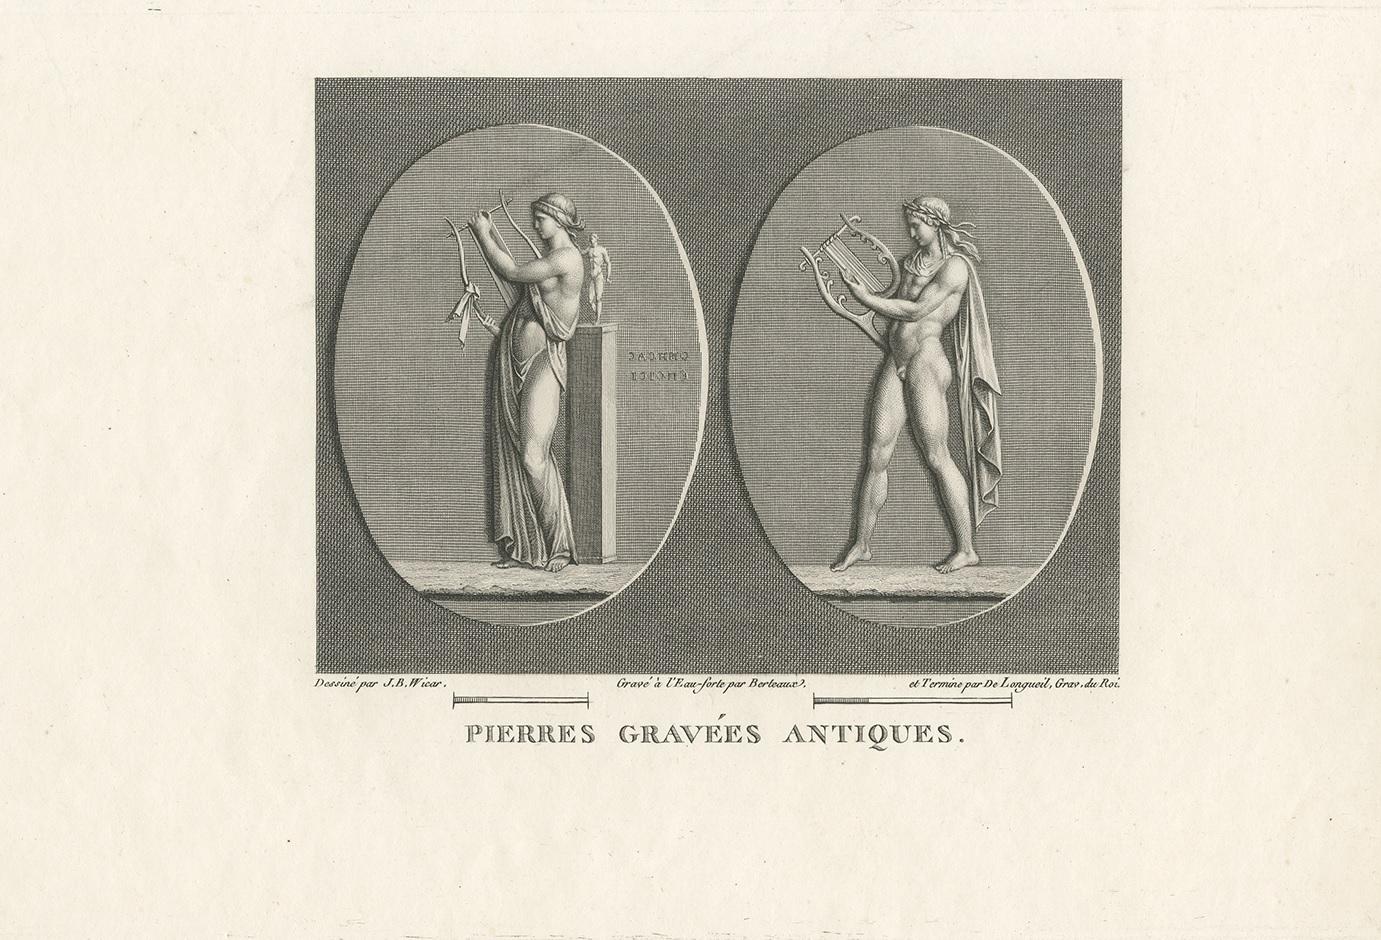 Antique print titled 'Pierres gravées Antiques'. Old print of two engraved stones depicting a male and female playing the lira. Made after drawings by J.B. Wicar.